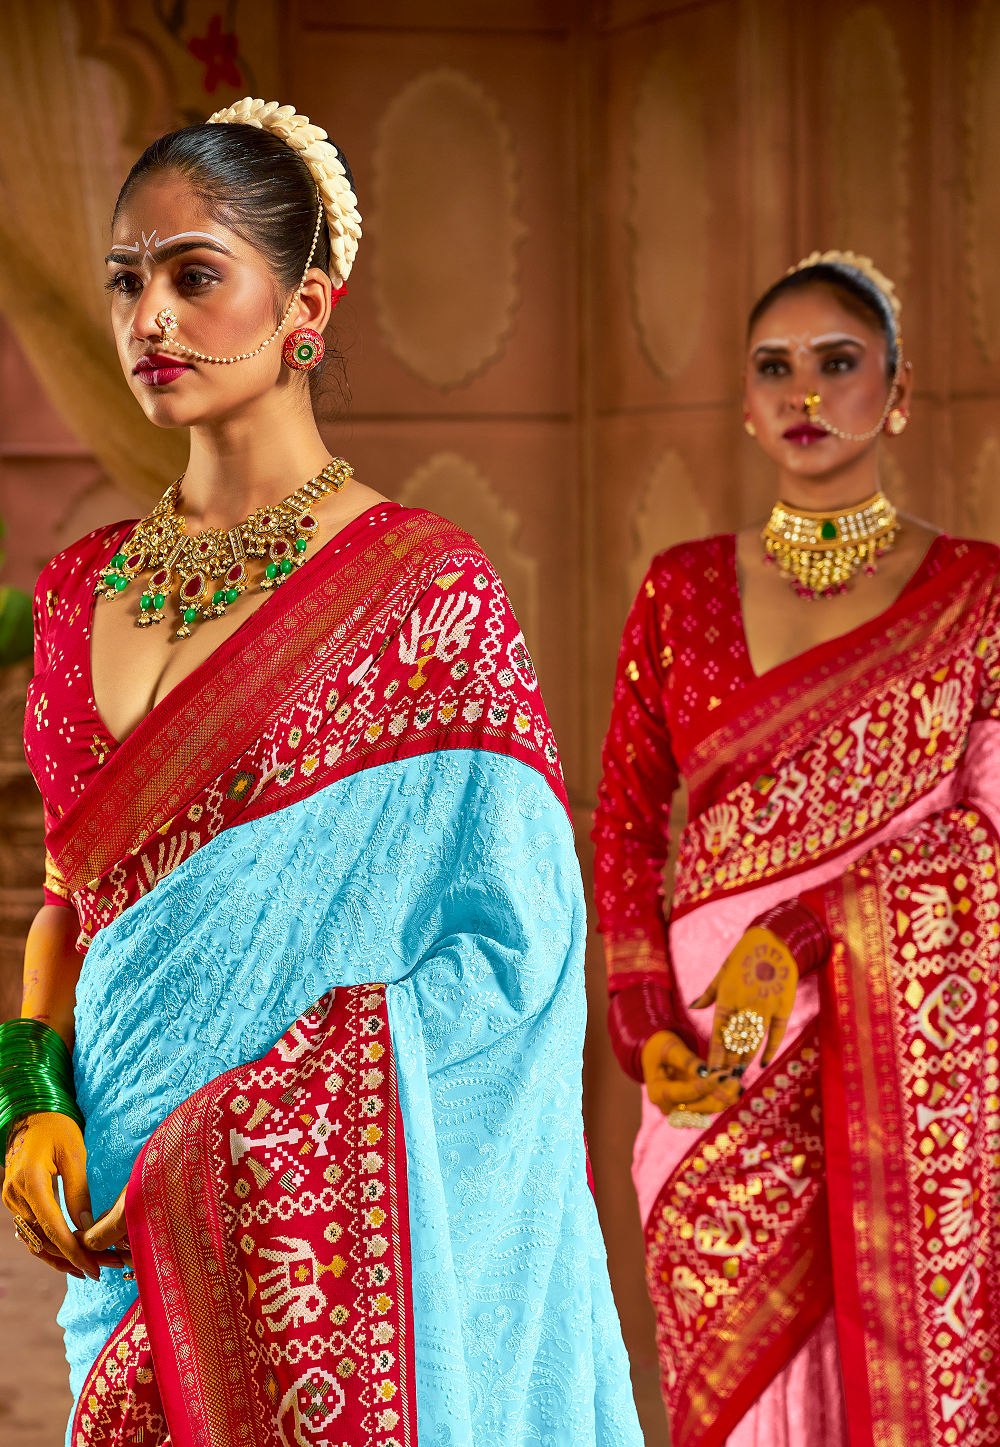 Georgette Embroidered Saree in Sky Blue